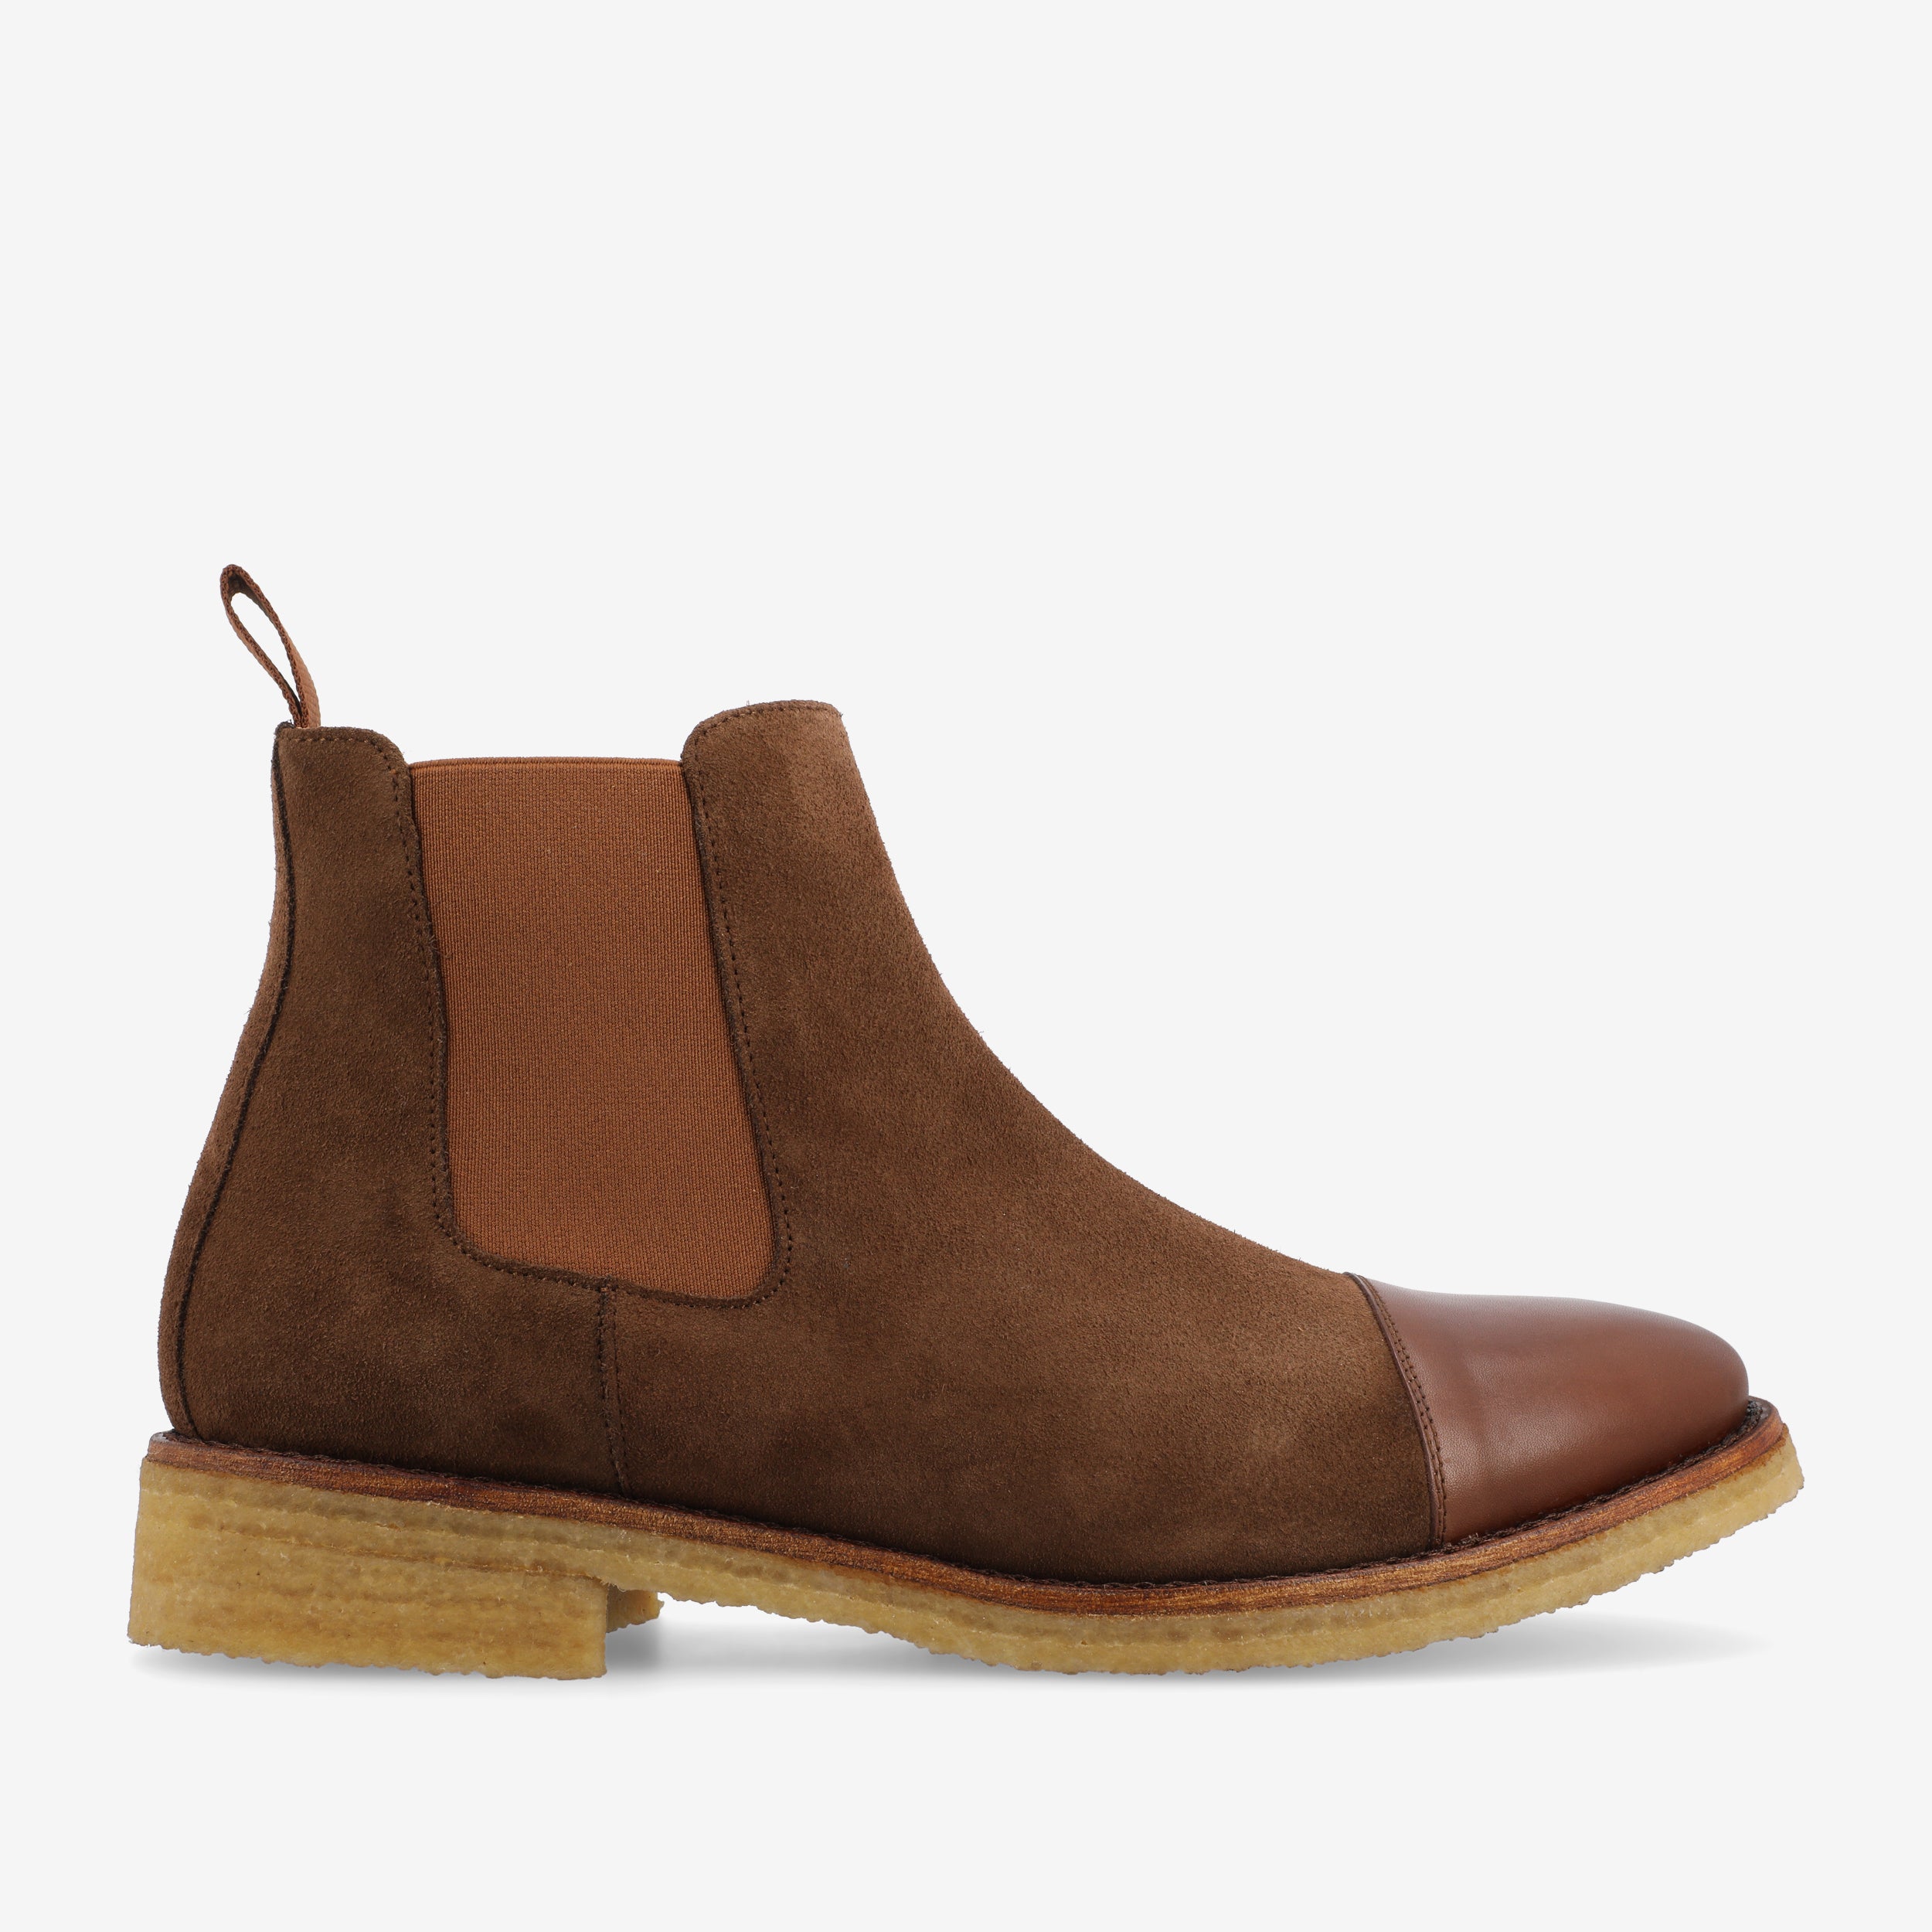 The Outback Boot in Mocha (Last Chance, Final Sale)